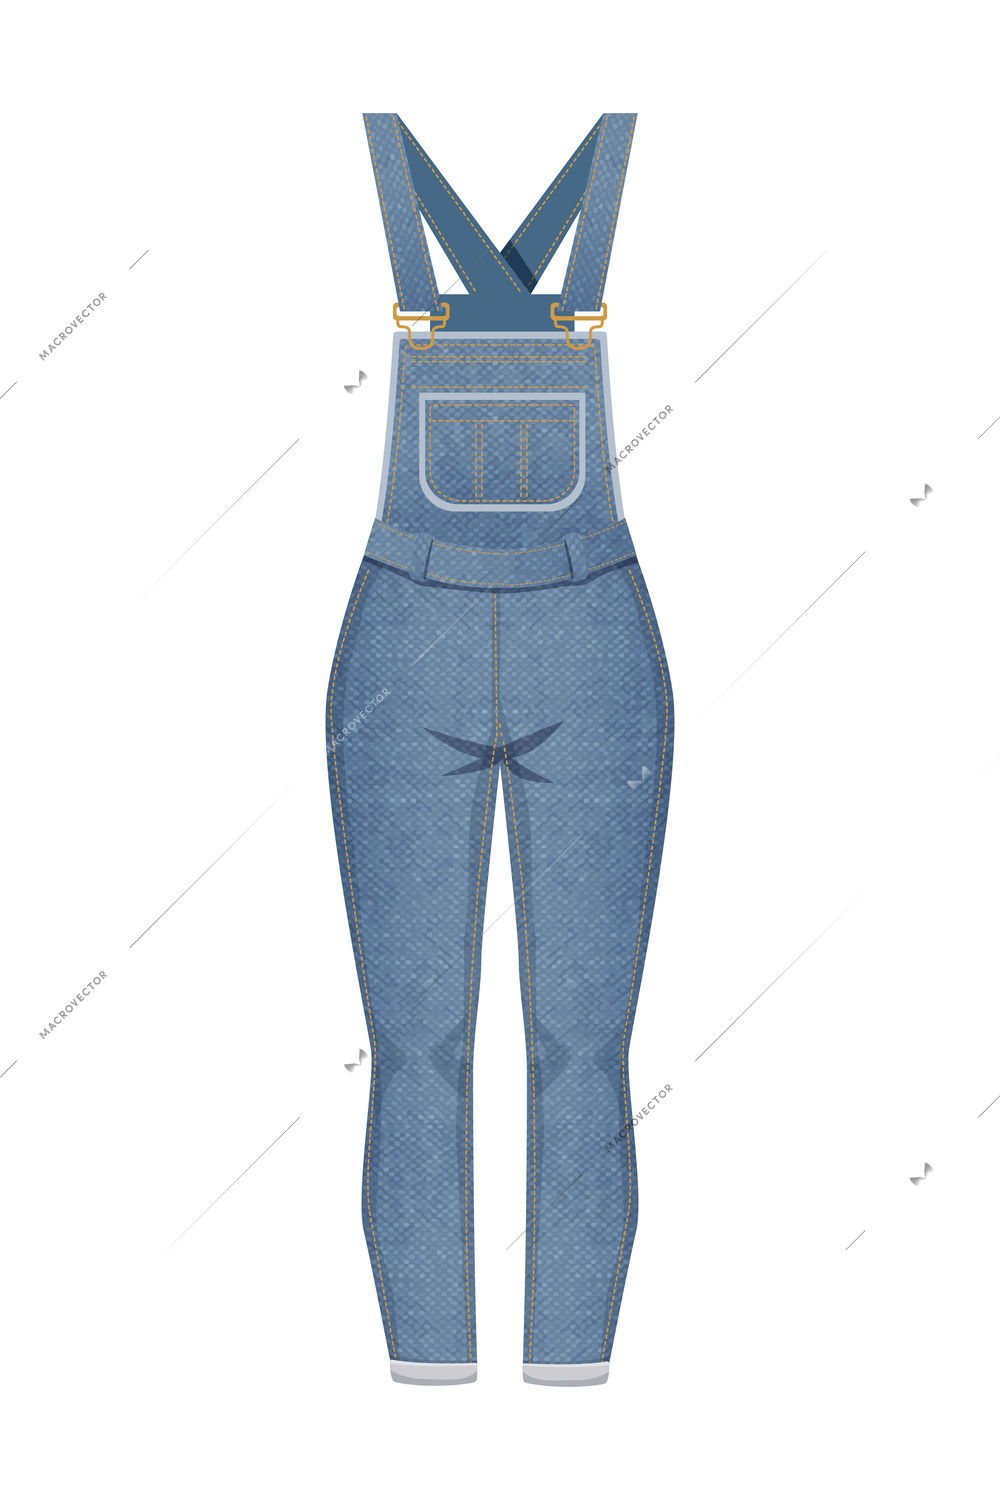 Modern denim clothing composition with isolated image of textile product made of jeans fabric vector illustration